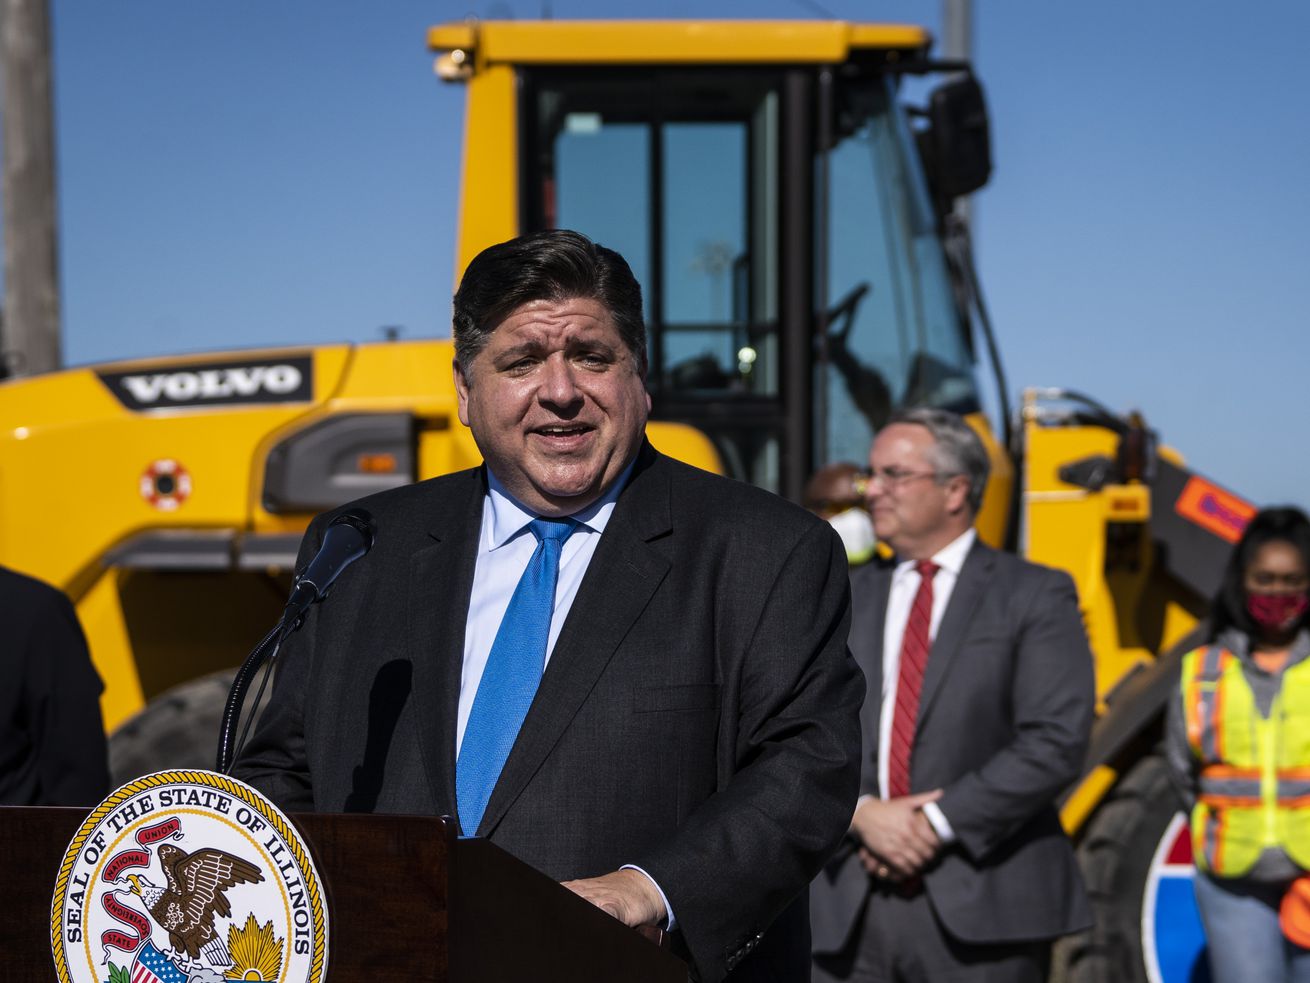 Gov. J.B. Pritzker announces a 6-year construction timeline to improve I-80, made possible by the Rebuild Illinois capital program, during a news conference at IDOT New Lenox, Monday morning, Oct. 18, 2021.